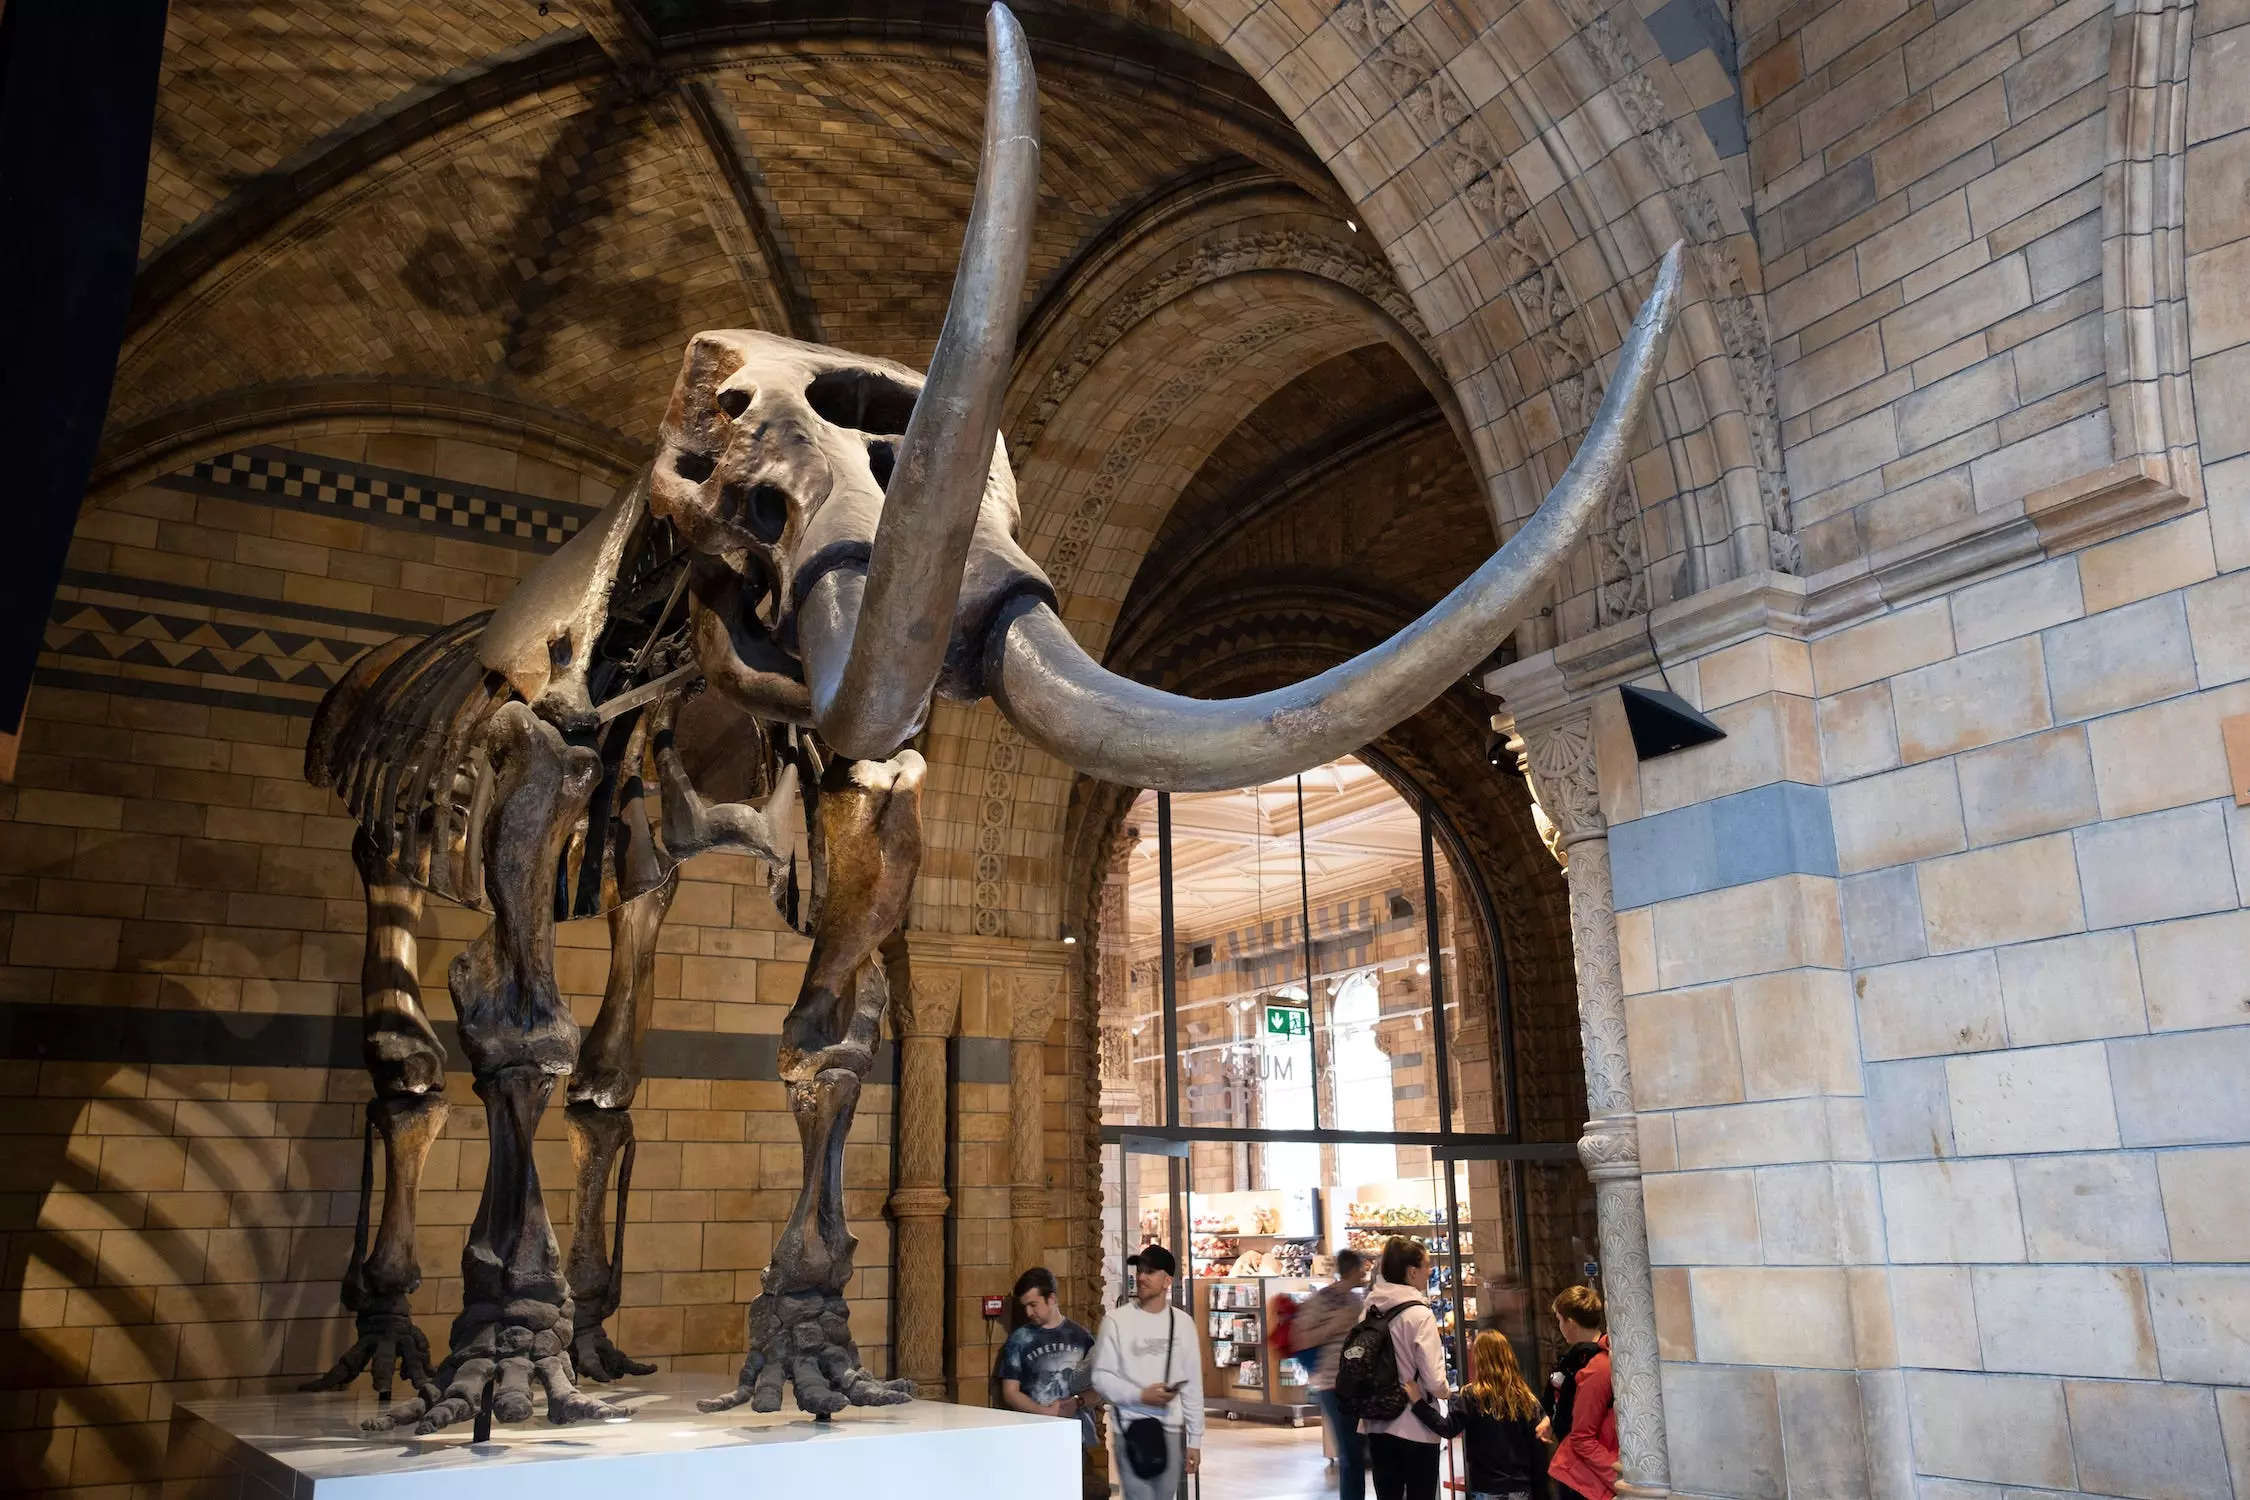 People look at the fossilized skeleton of an American Mastodon at the Natural History Museum